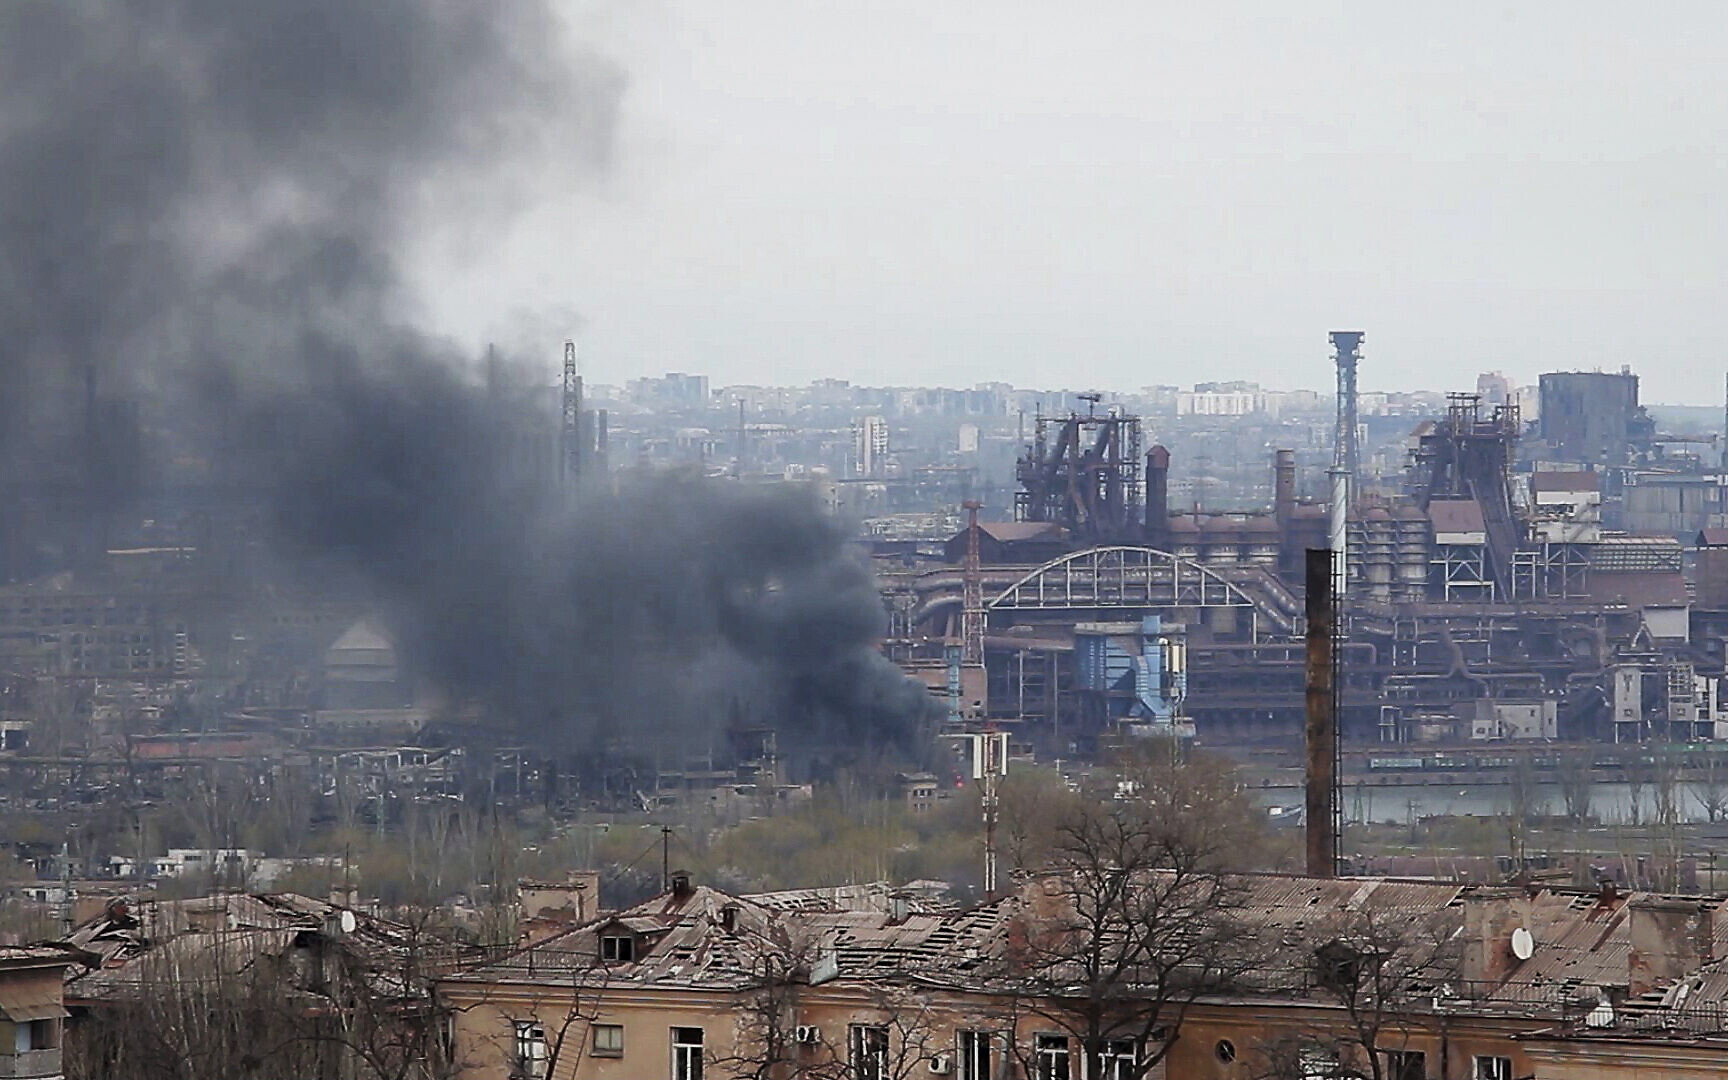 Ukraine: Russia 'trying to destroy' last troops in besieged Mariupol steel plant | The Times of Israel